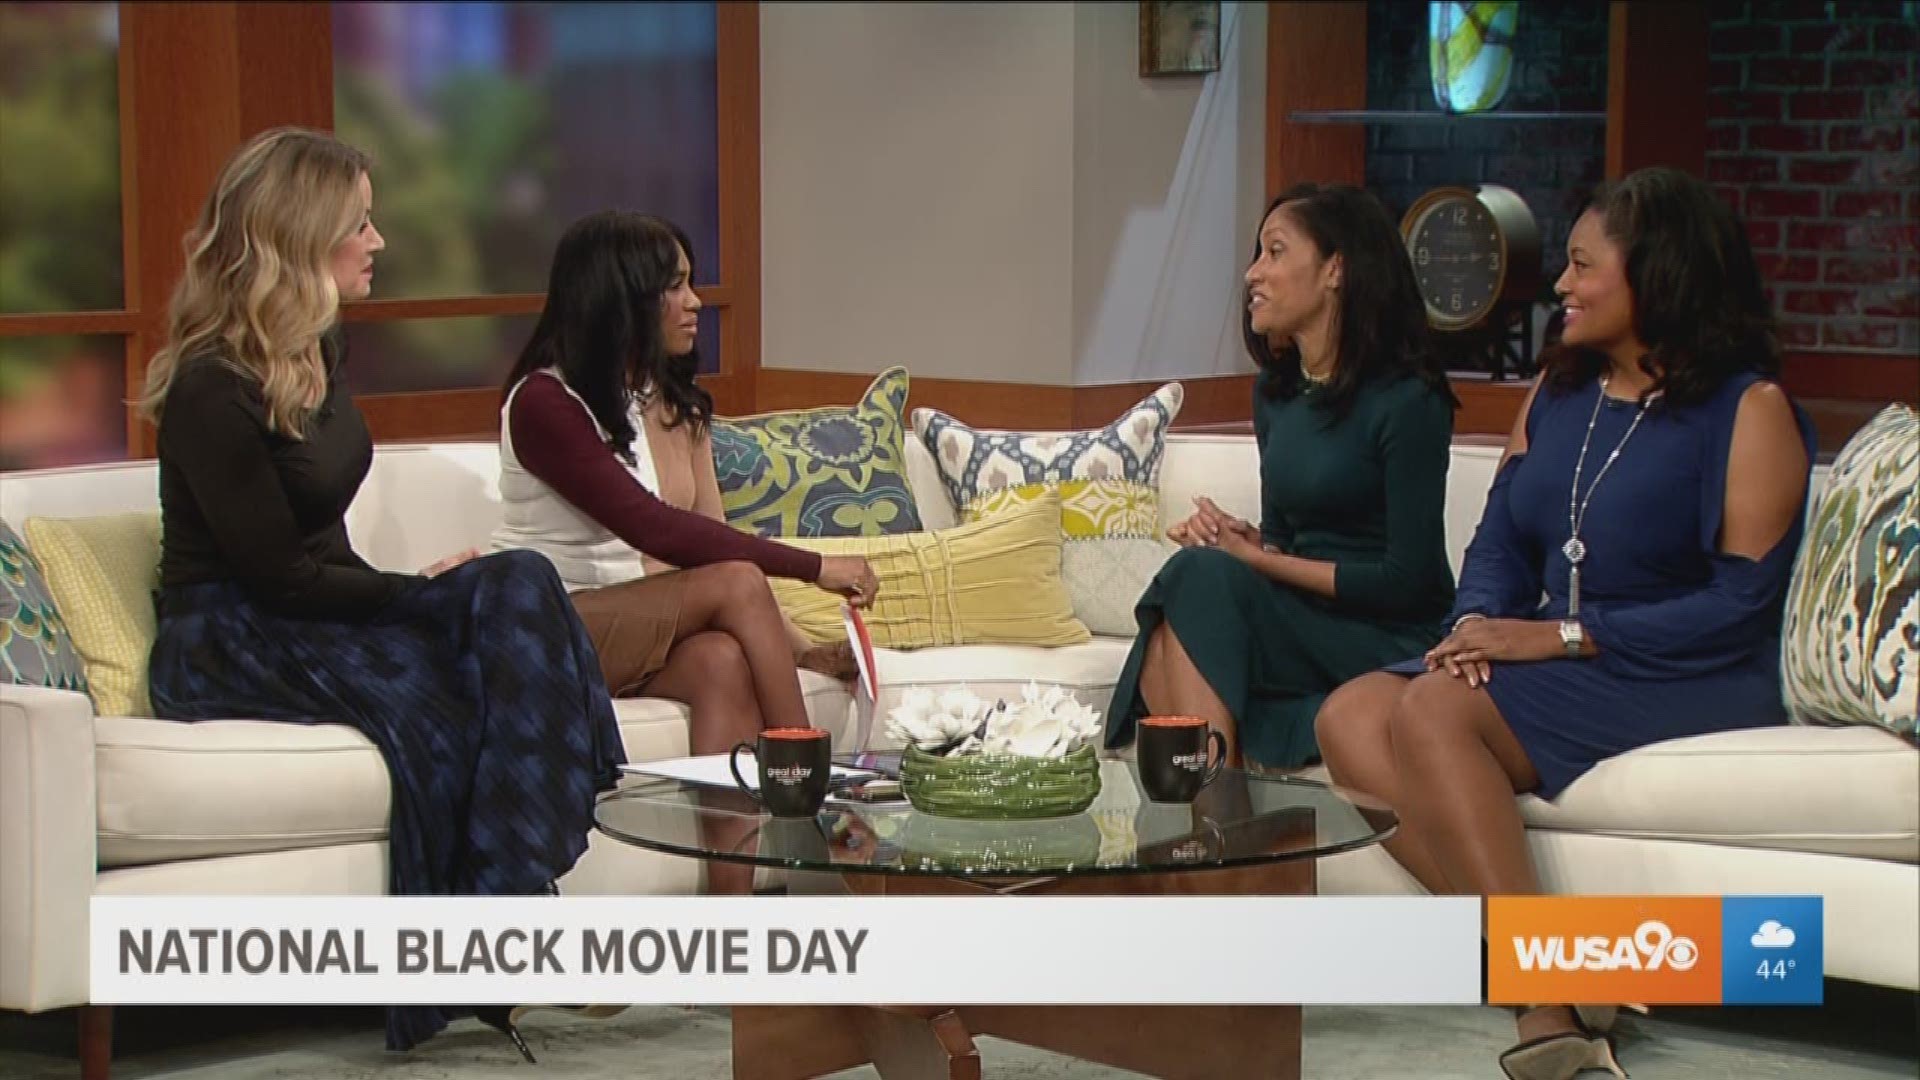 National Black Movie Day is February 15th!  Agnes Moss, Founder of the National Black Movie Association and Susan Leigh explain the importance of diversity in films.